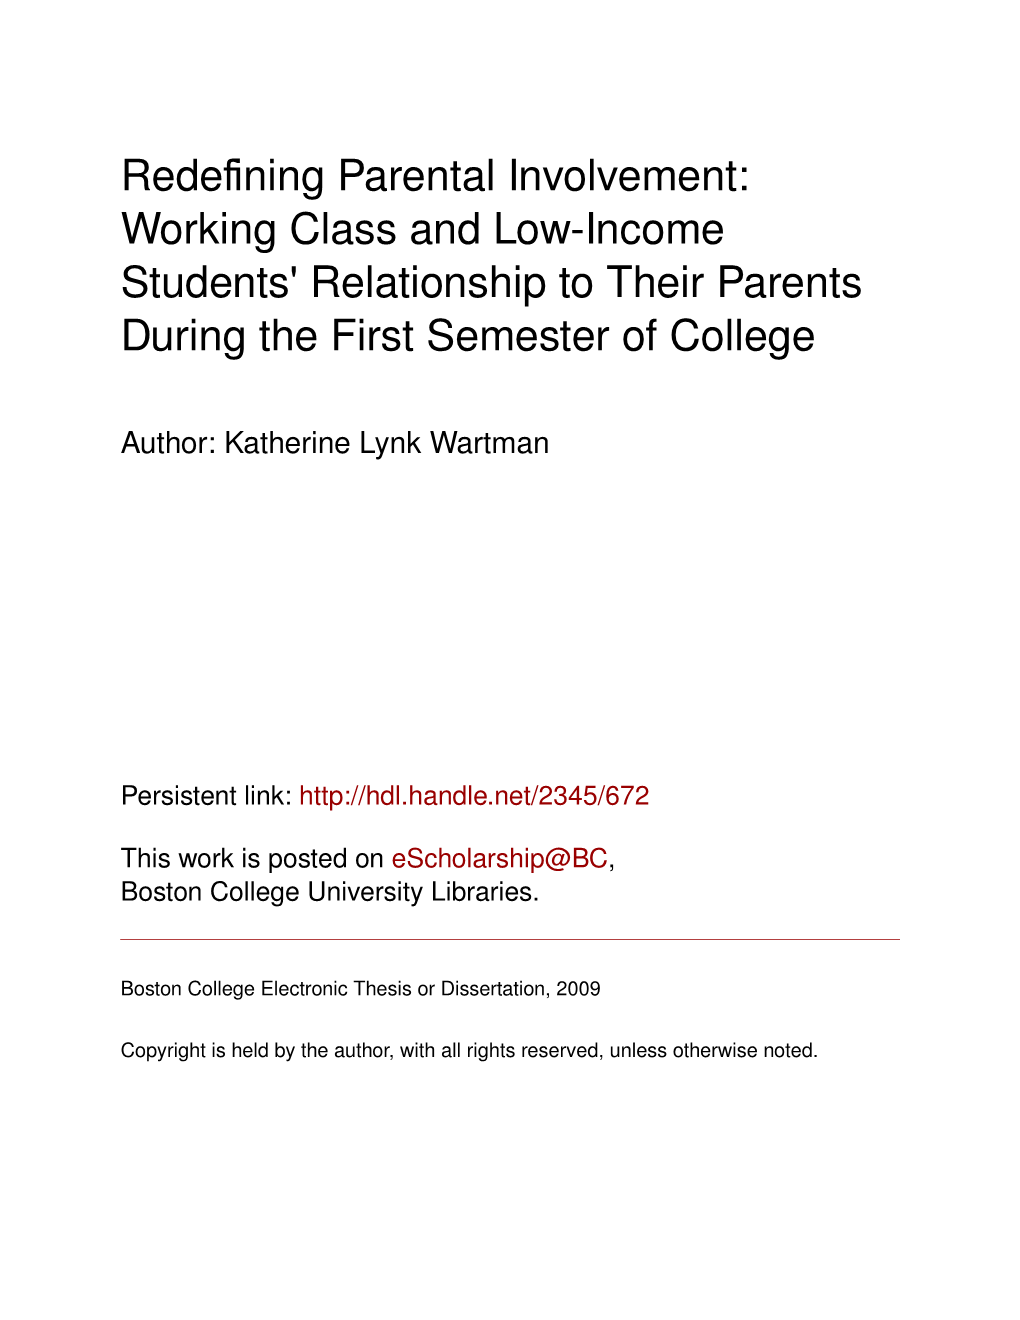 Redefining Parental Involvement: Working Class and Low-Income